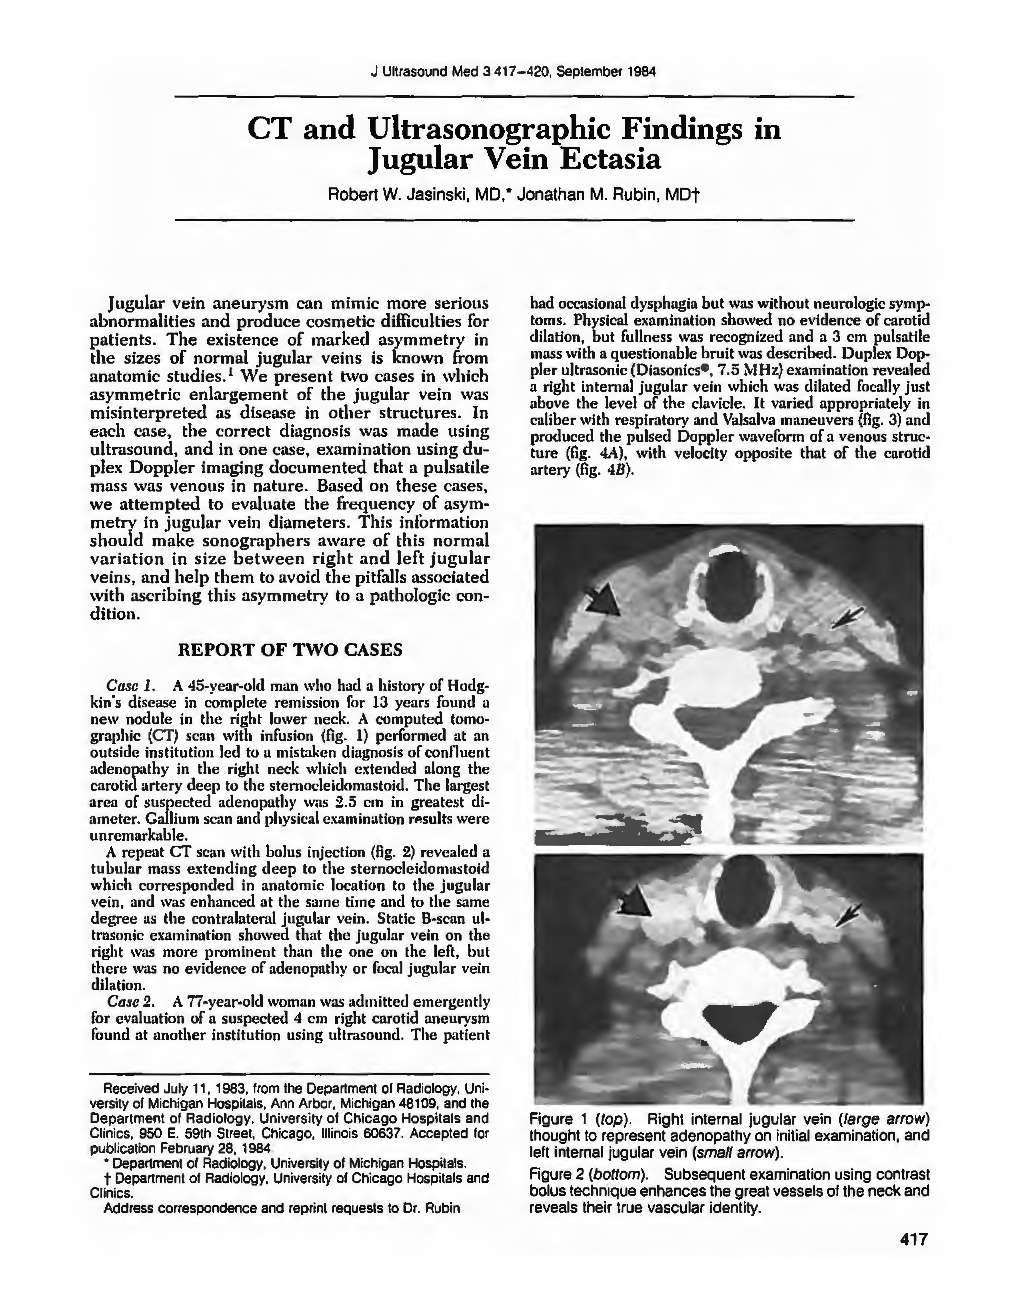 CT and Ultrasonographic Findings in Jugular Vein Ectasia